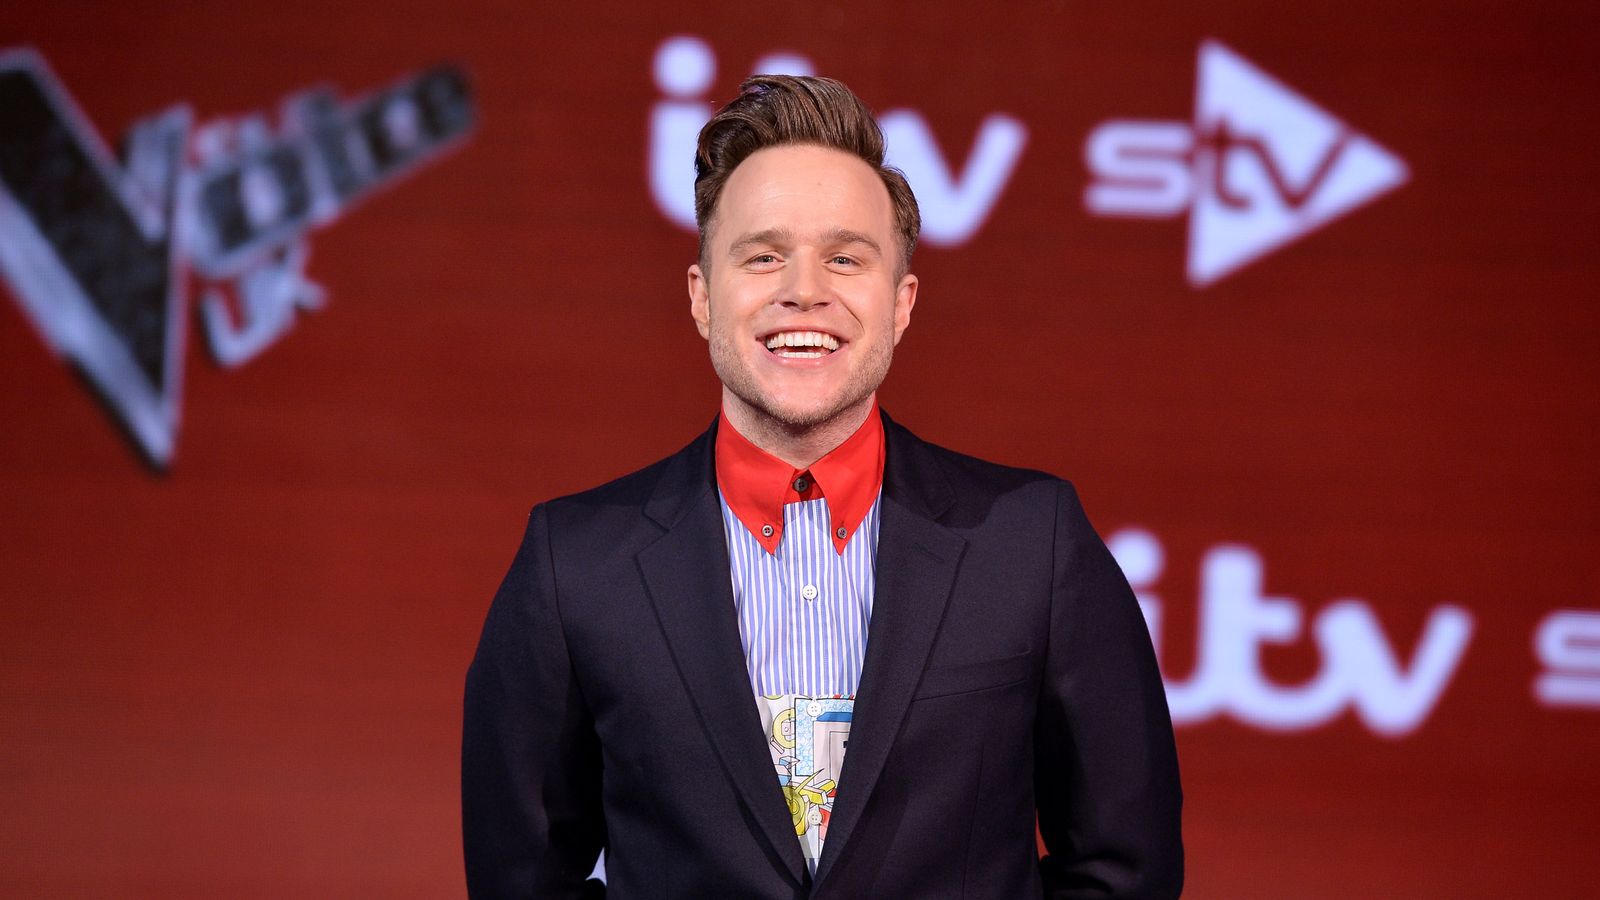 British Transport Police rubbishes Olly Murs' claim of terror alert cover-up